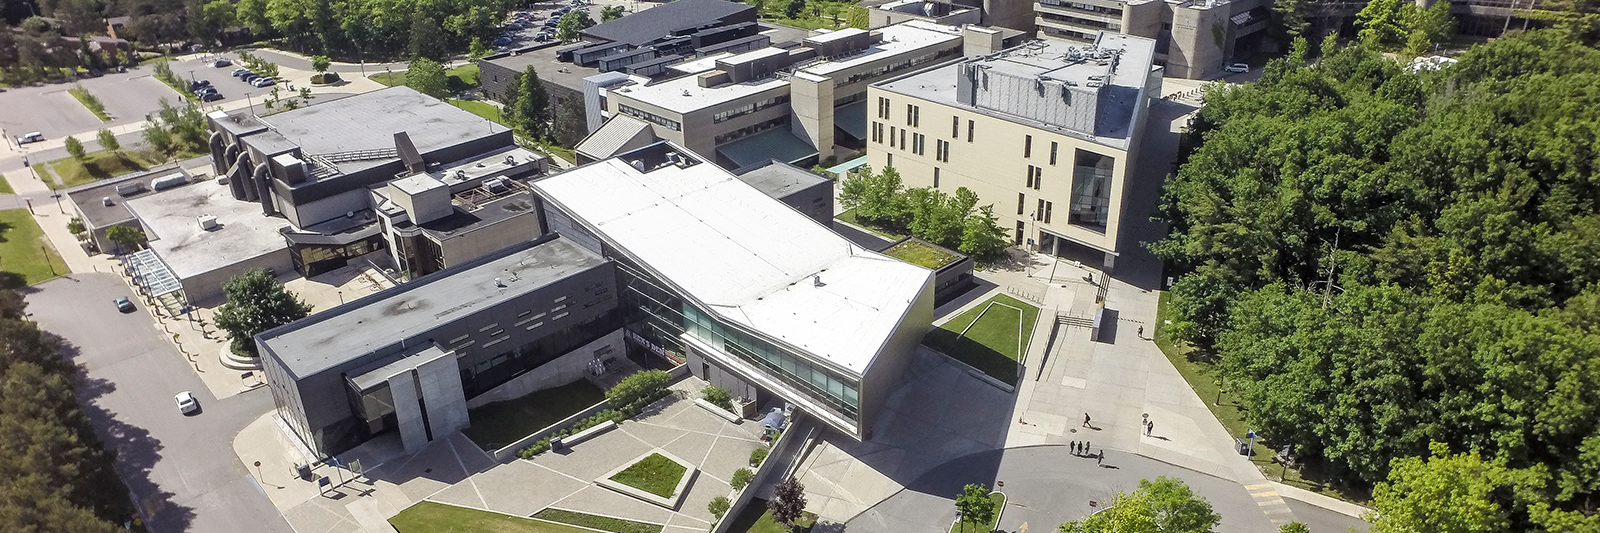 Aerial view of UTSC campus